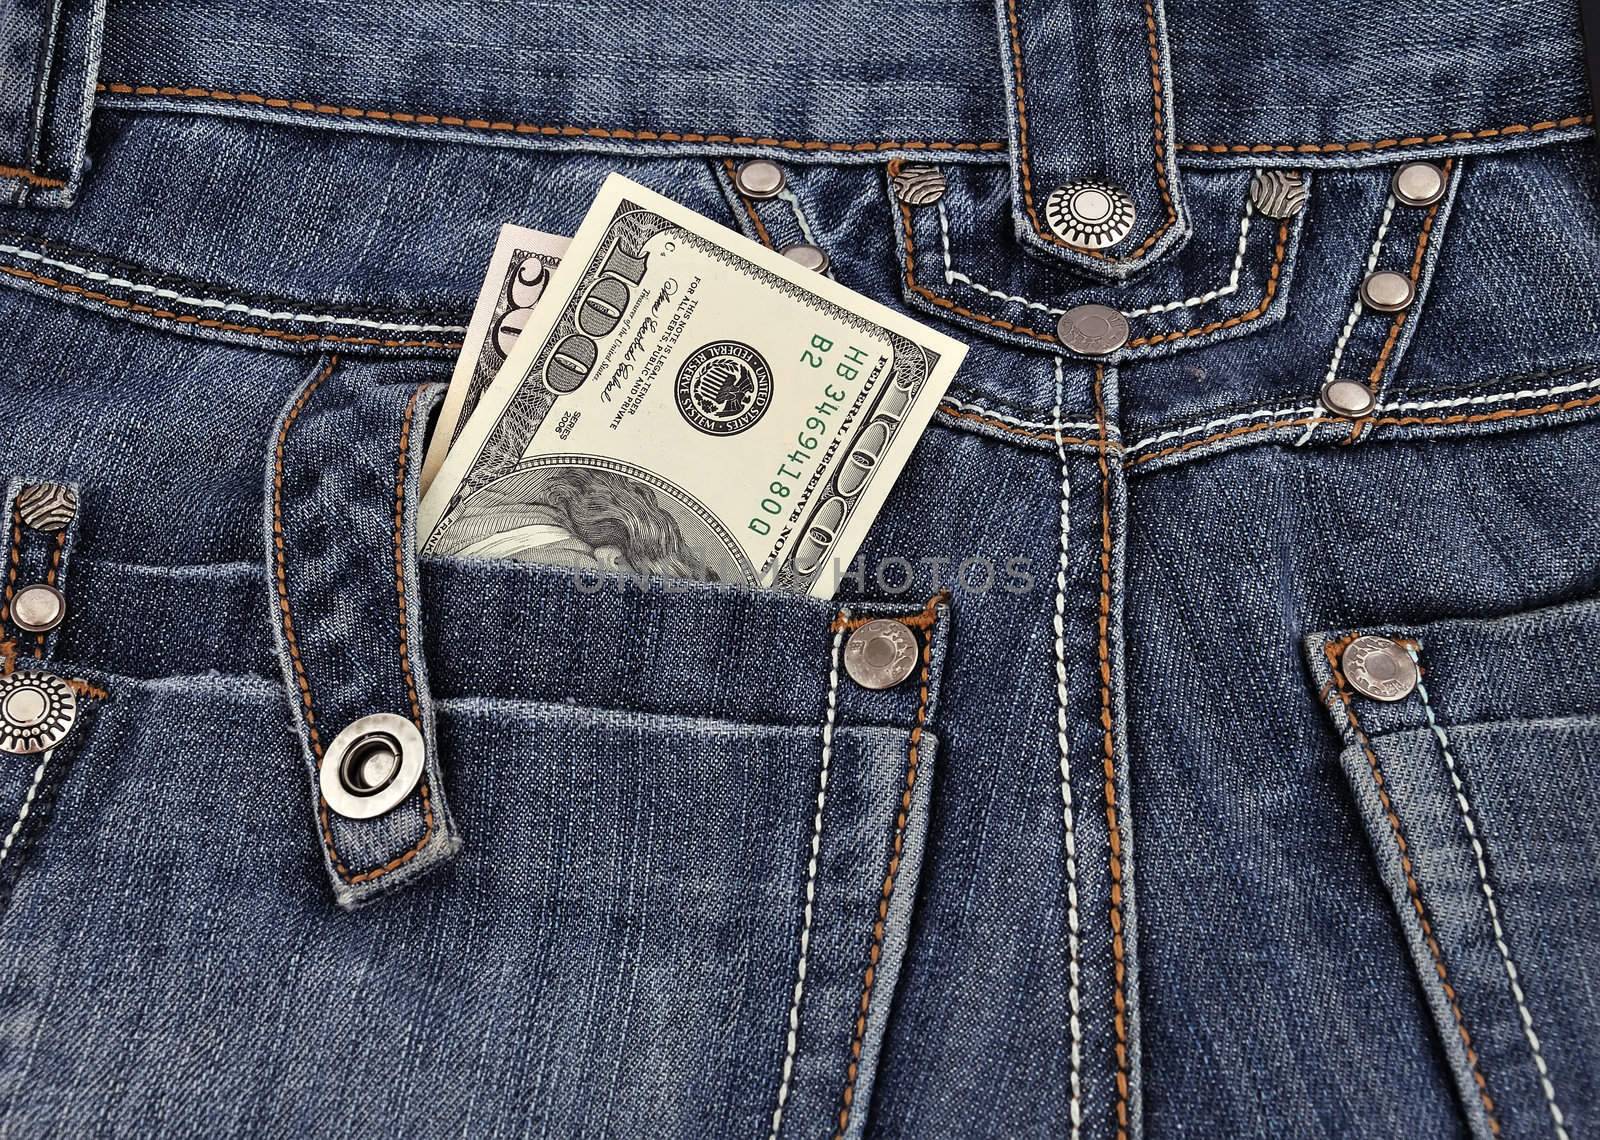 dollars in his back pocket Jeans. close-up